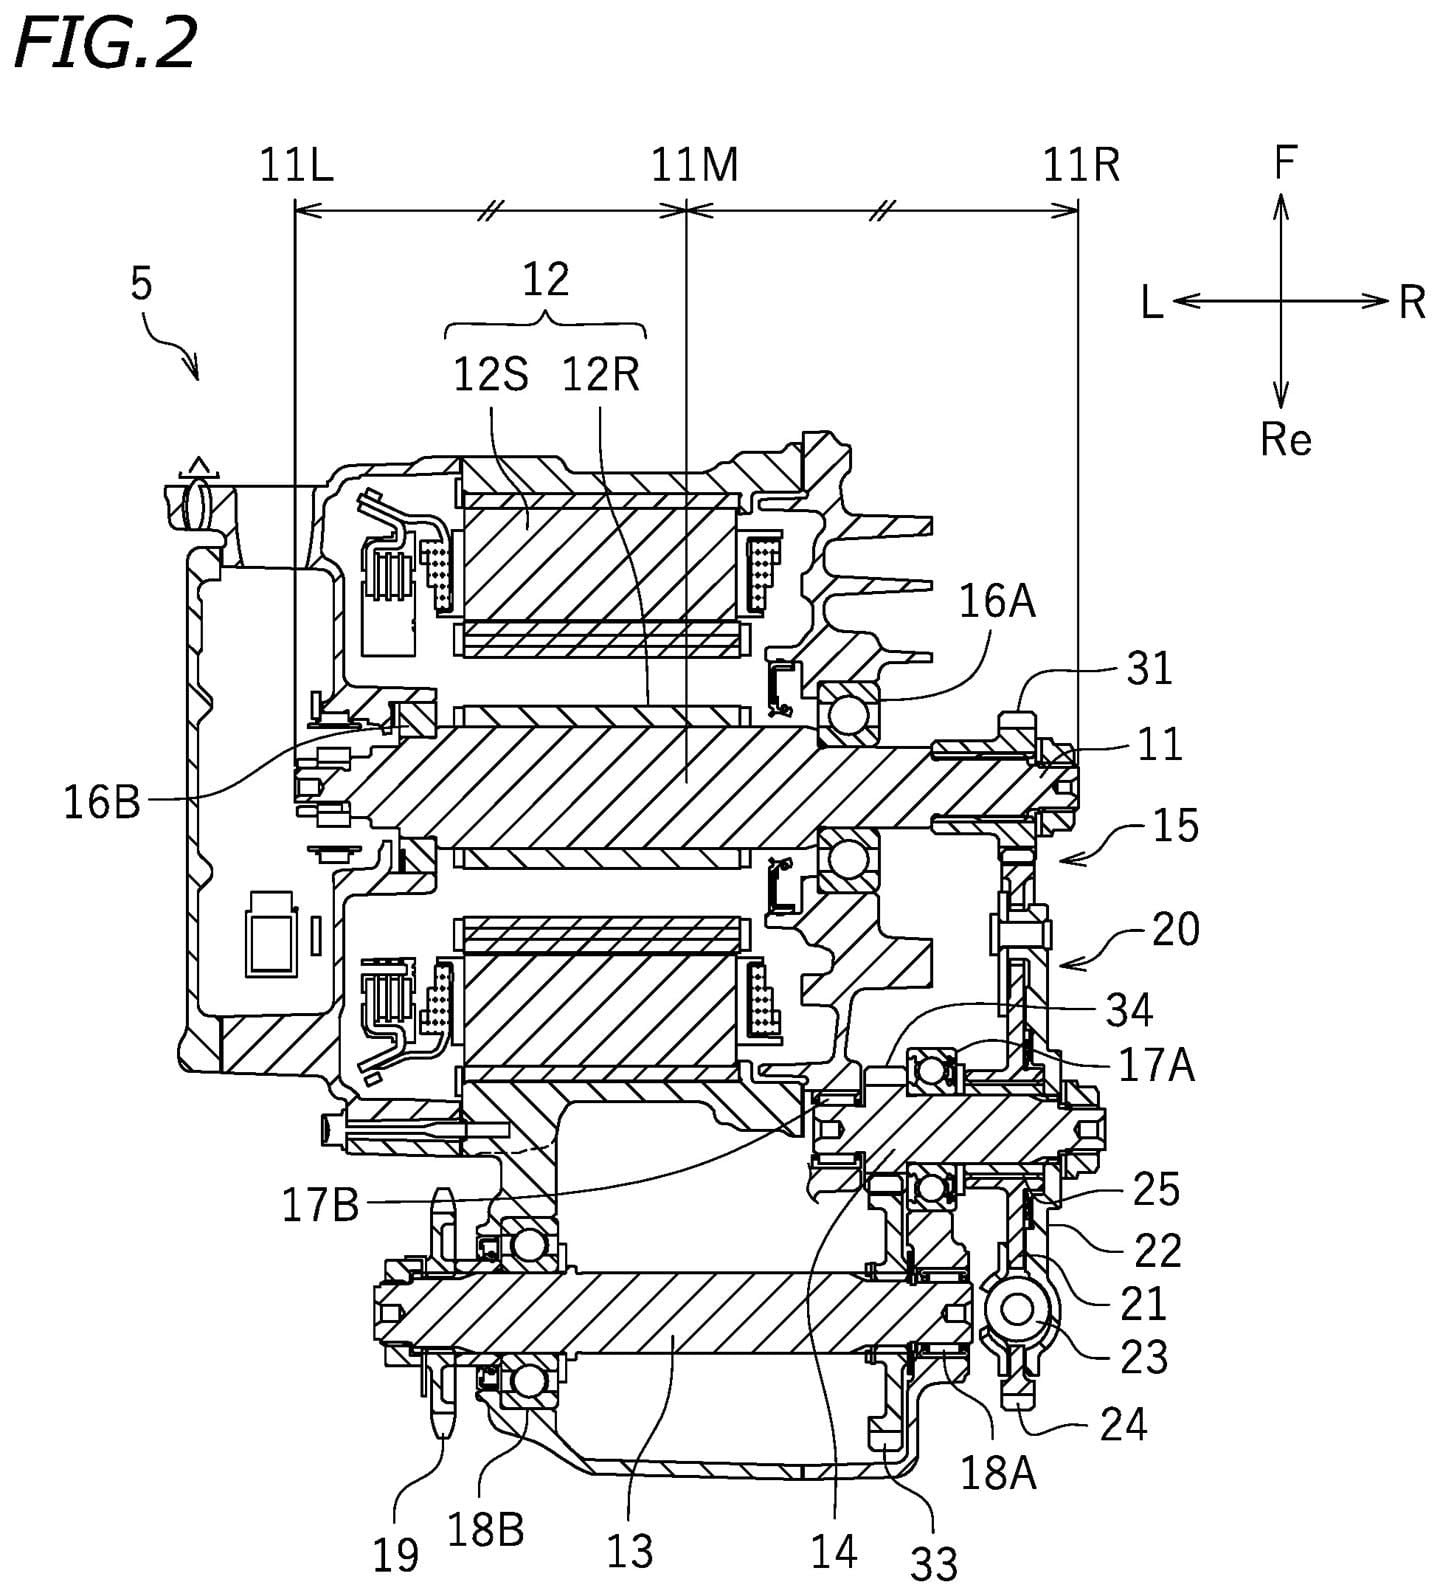 The electric MXer patents focus on its transmission that utilizes a clutch and flywheel to control power, unlike many EVs direct drive drivetrains.